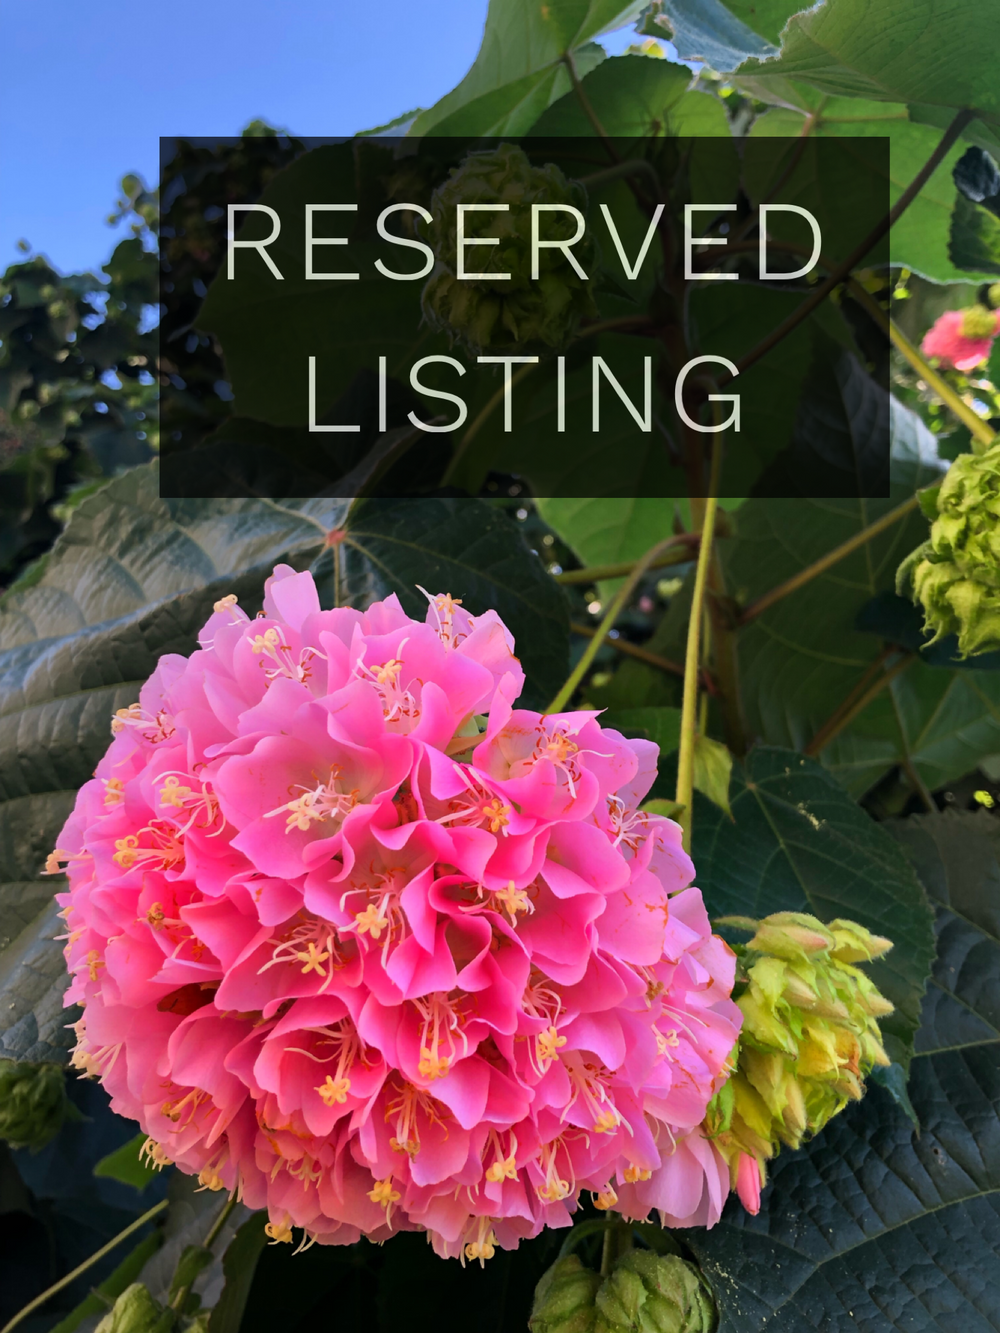 RESERVED LISTING - n.paradise